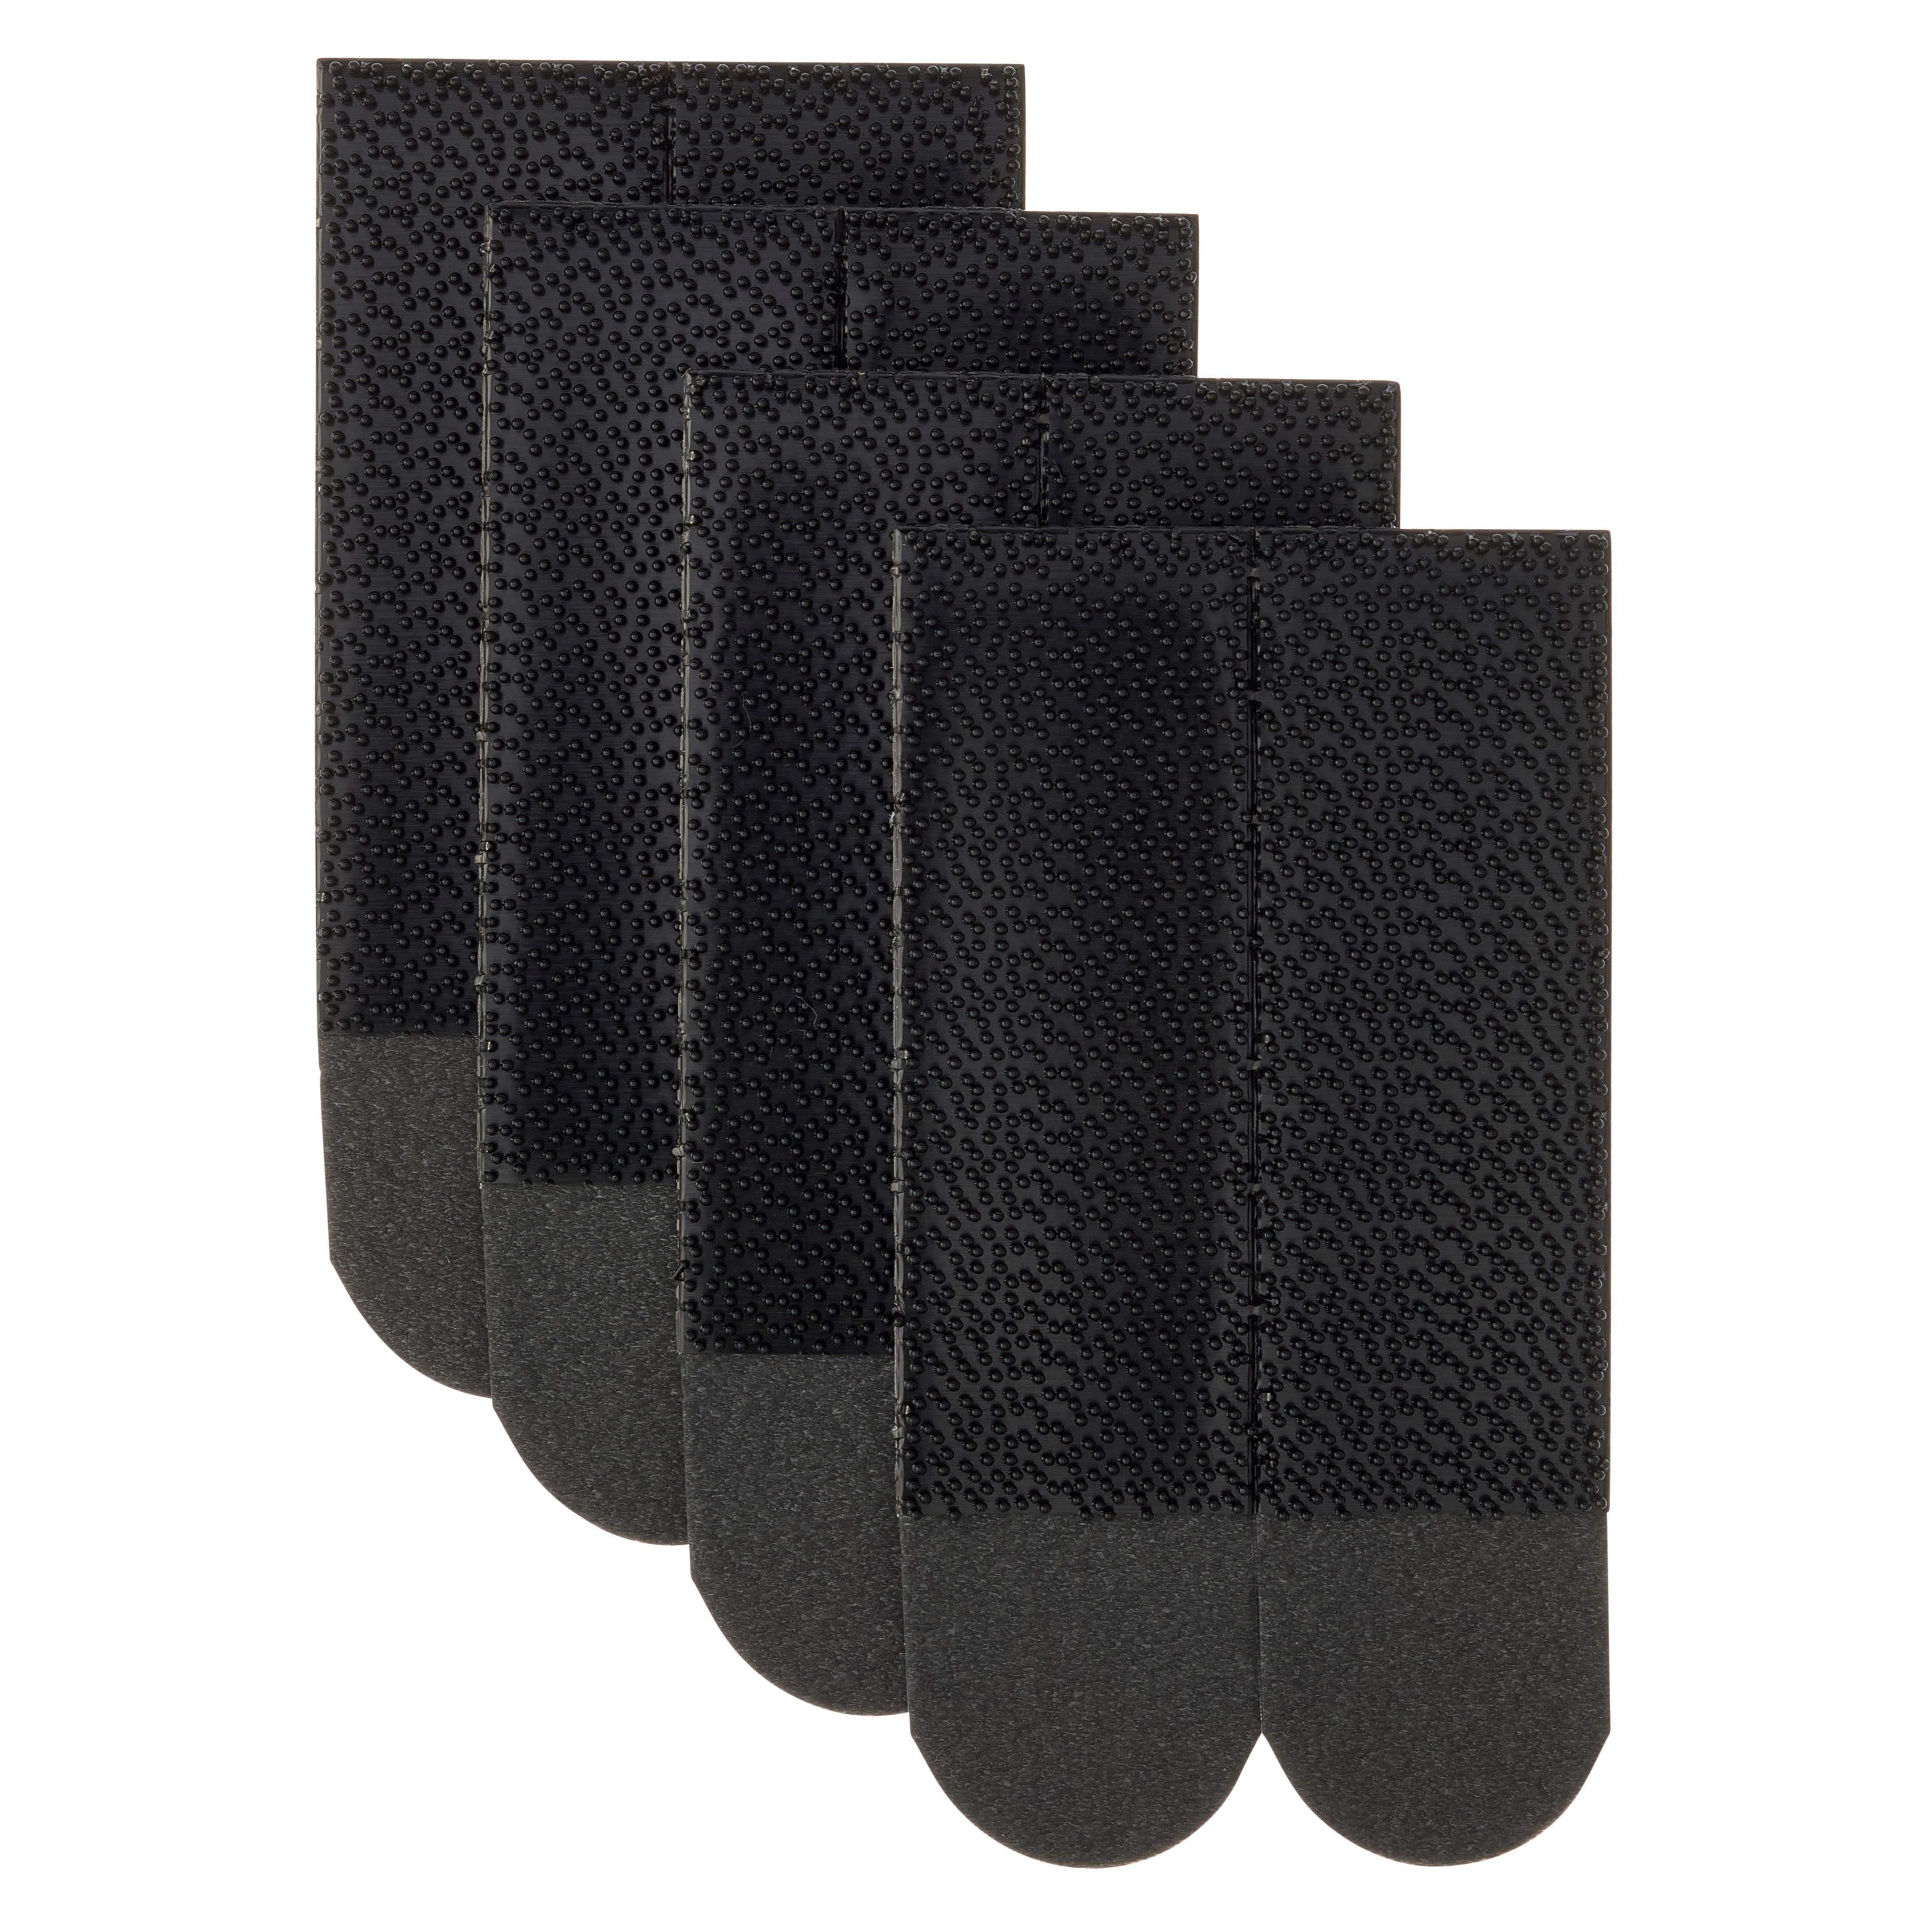 Command&#x2122; Medium Black Picture Hanging Strips, 4ct.